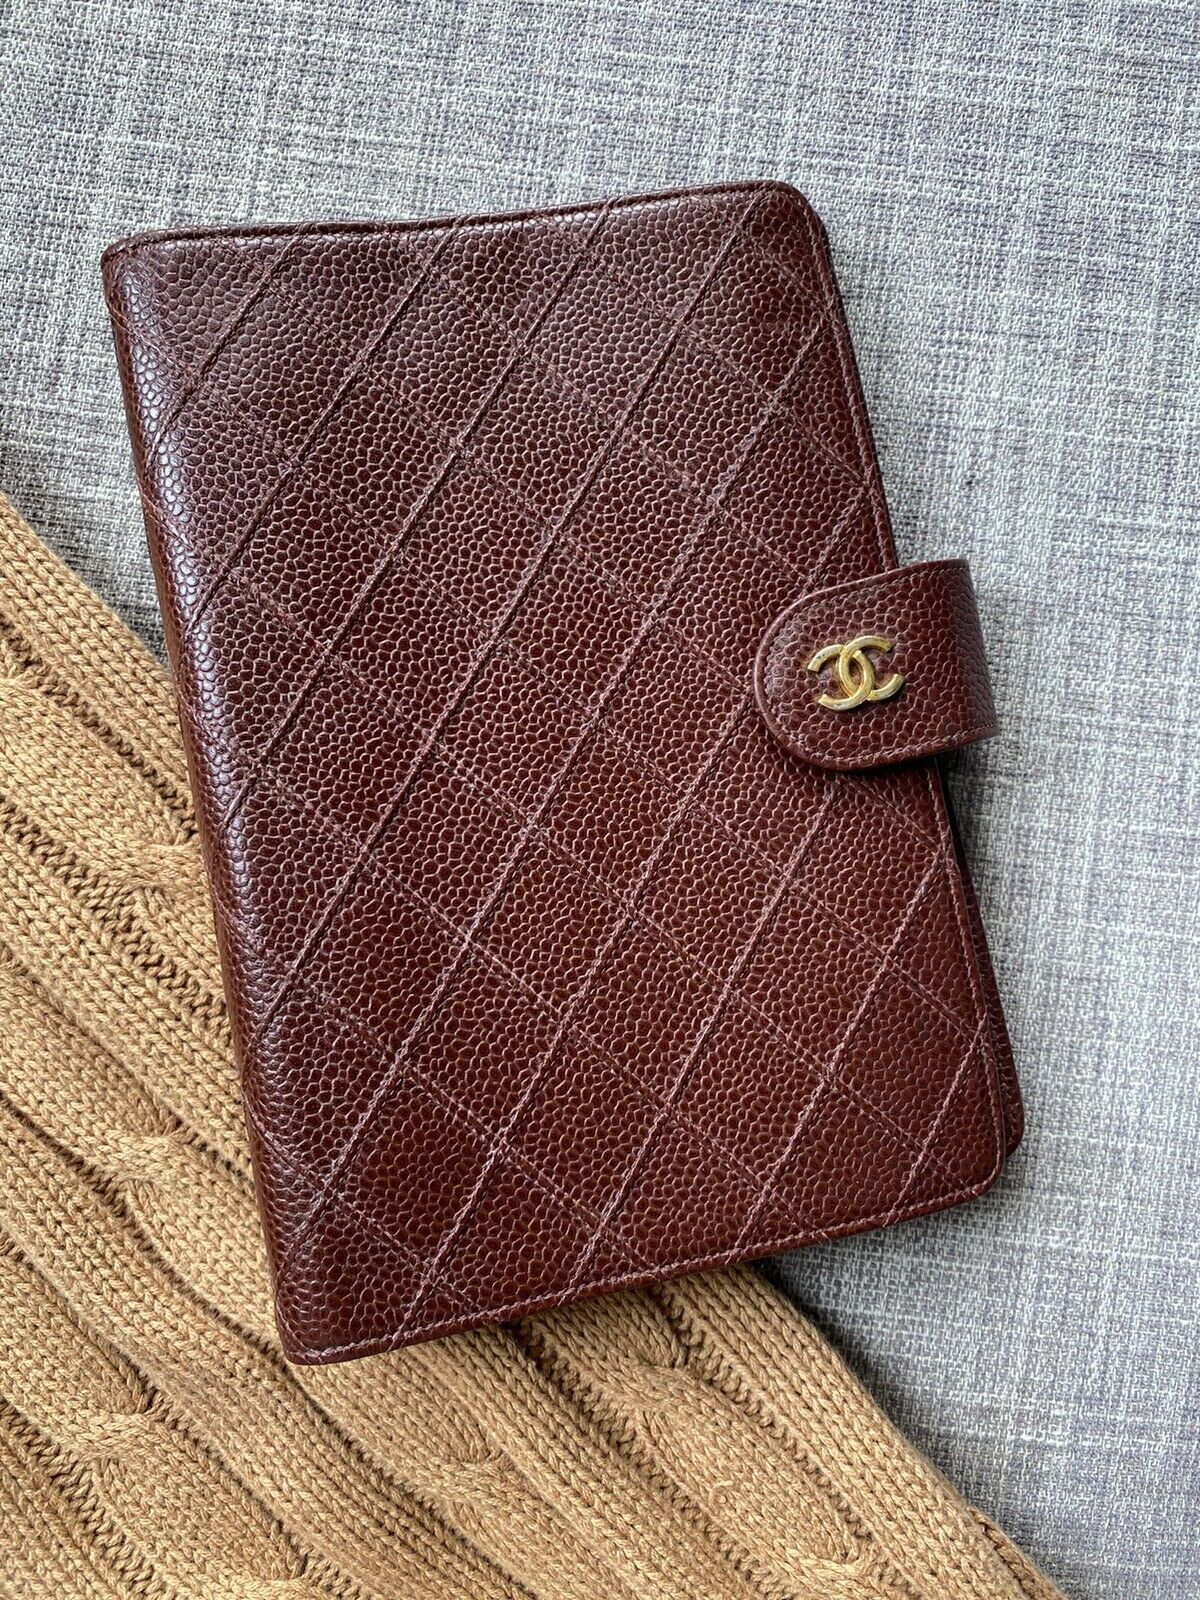 Authentic Vintage Chanel Quilted Caviar Leather Agenda In Brown. A6/mm